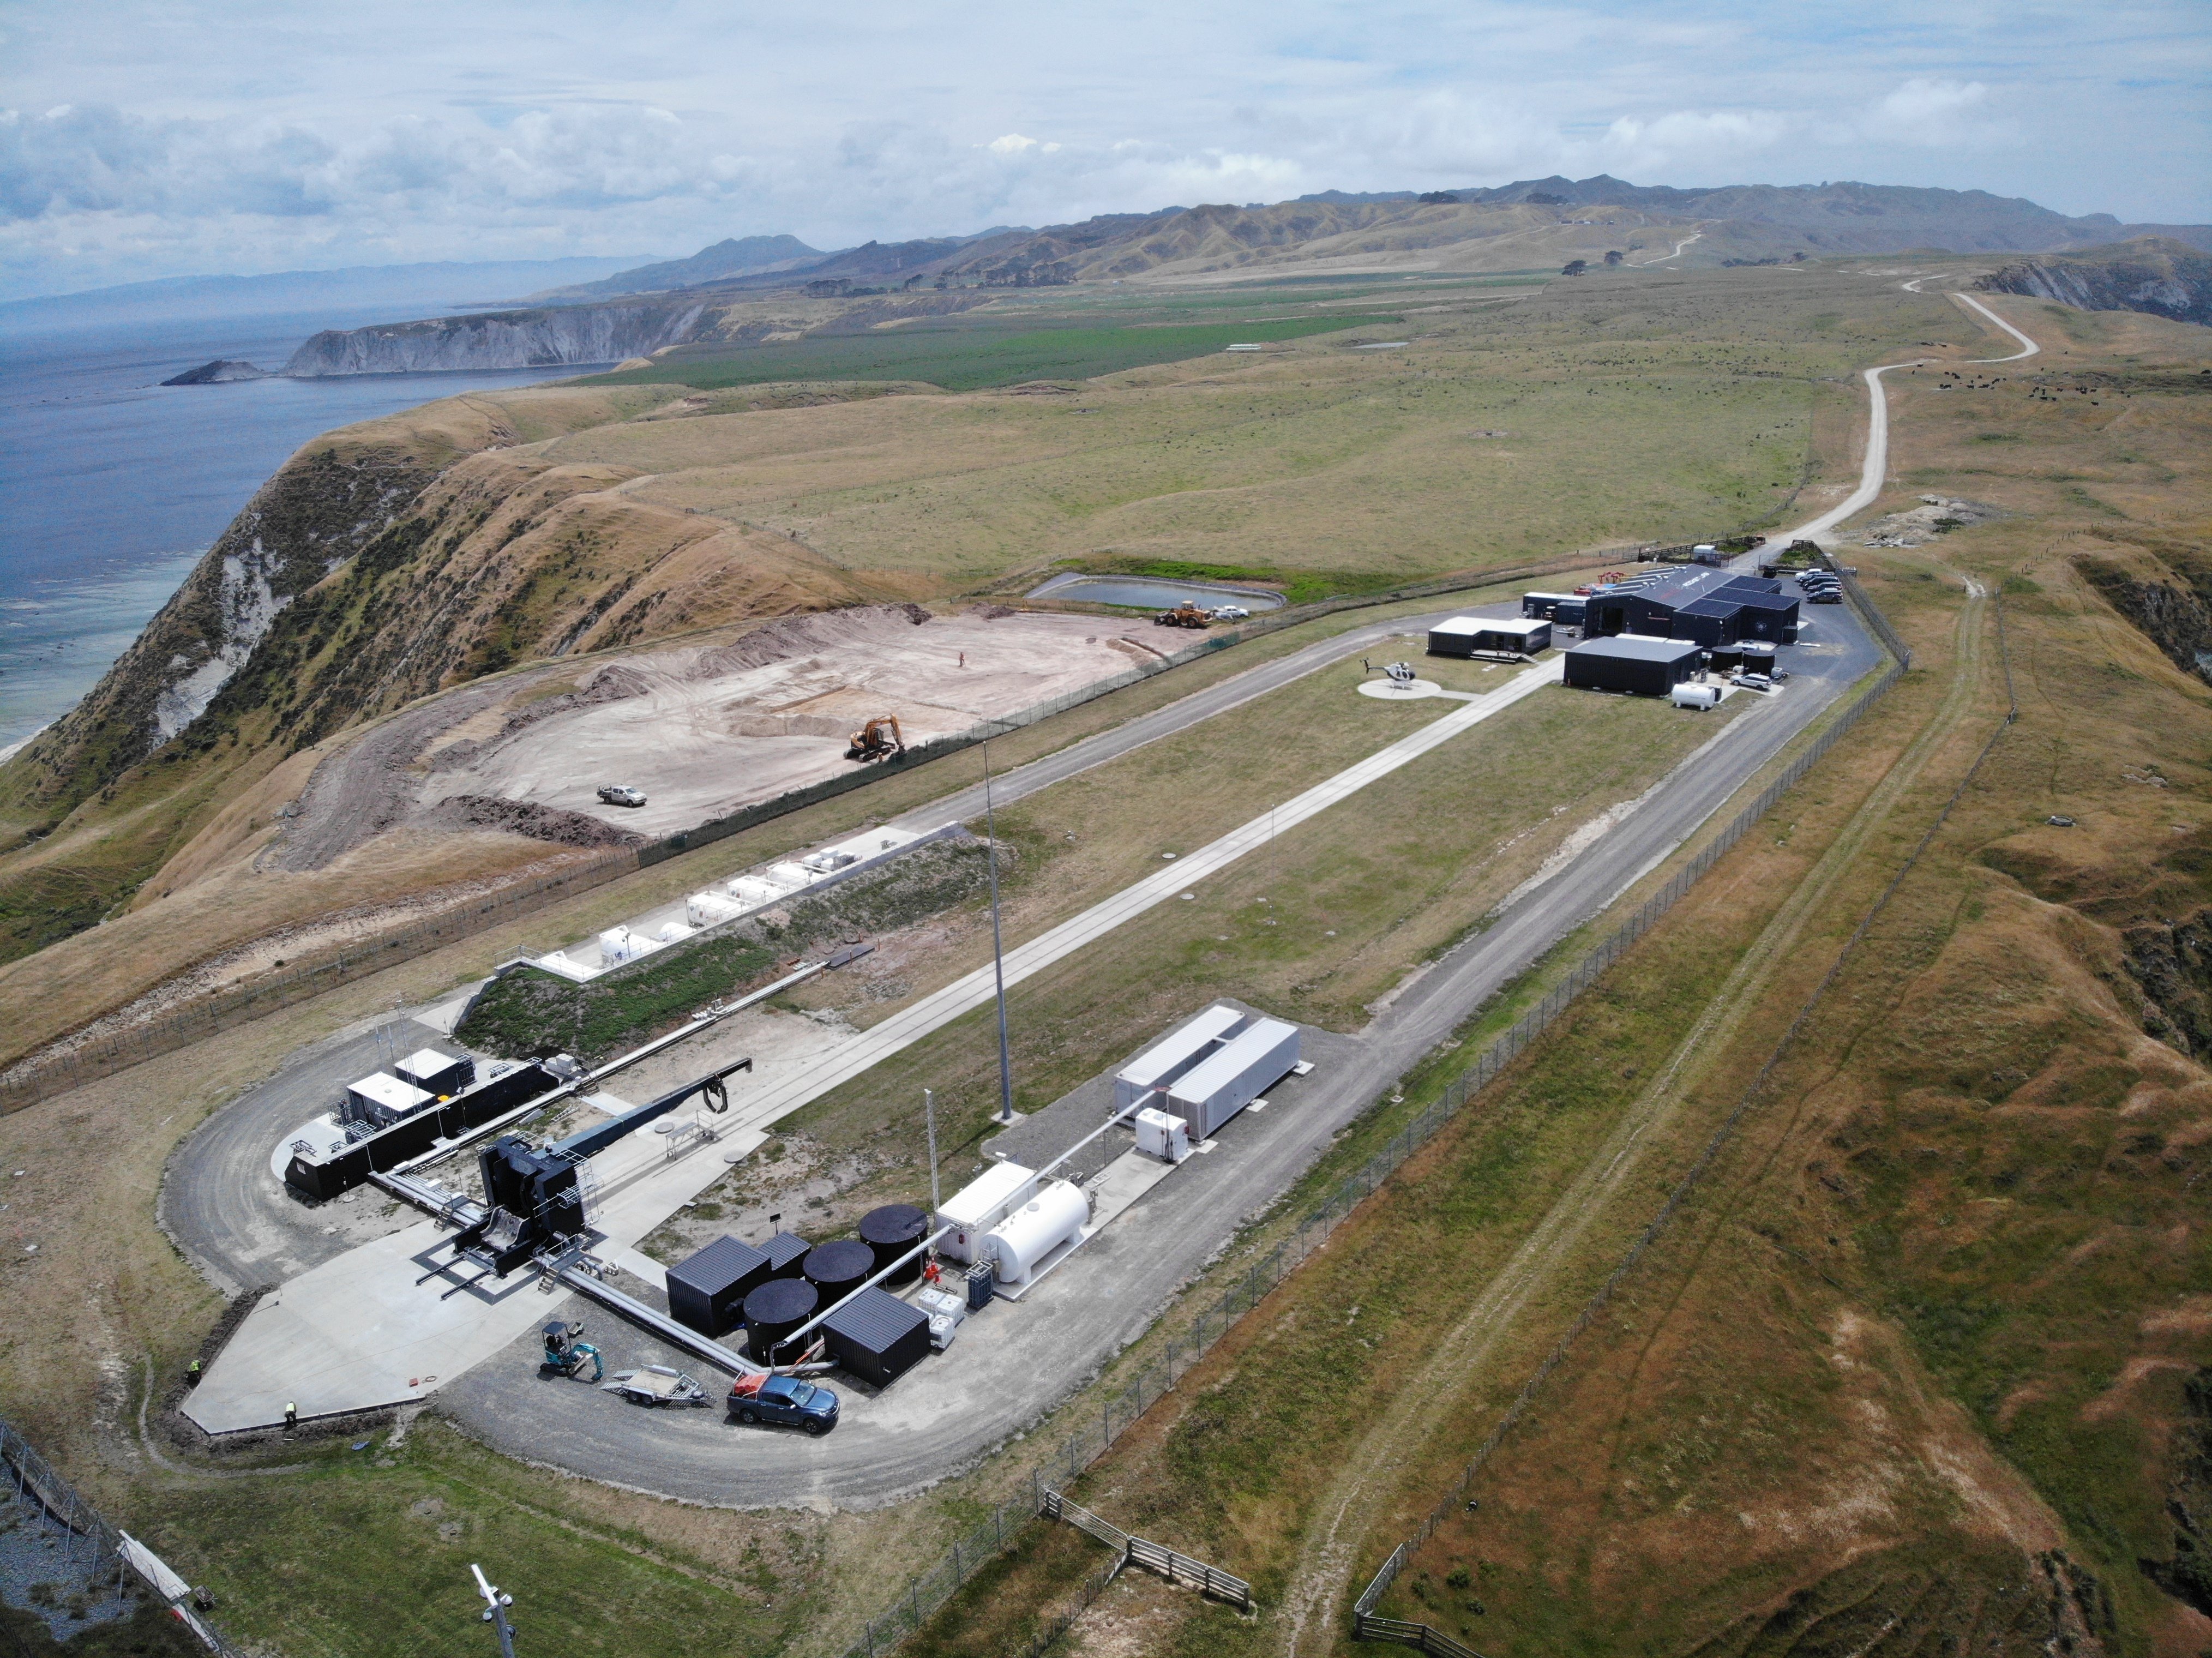 In December 2019, Rocket Lab began building a new launchpad, called Pad B, at its Launch Complex 1 on the Mahia Peninsula of New Zealand's North Island.